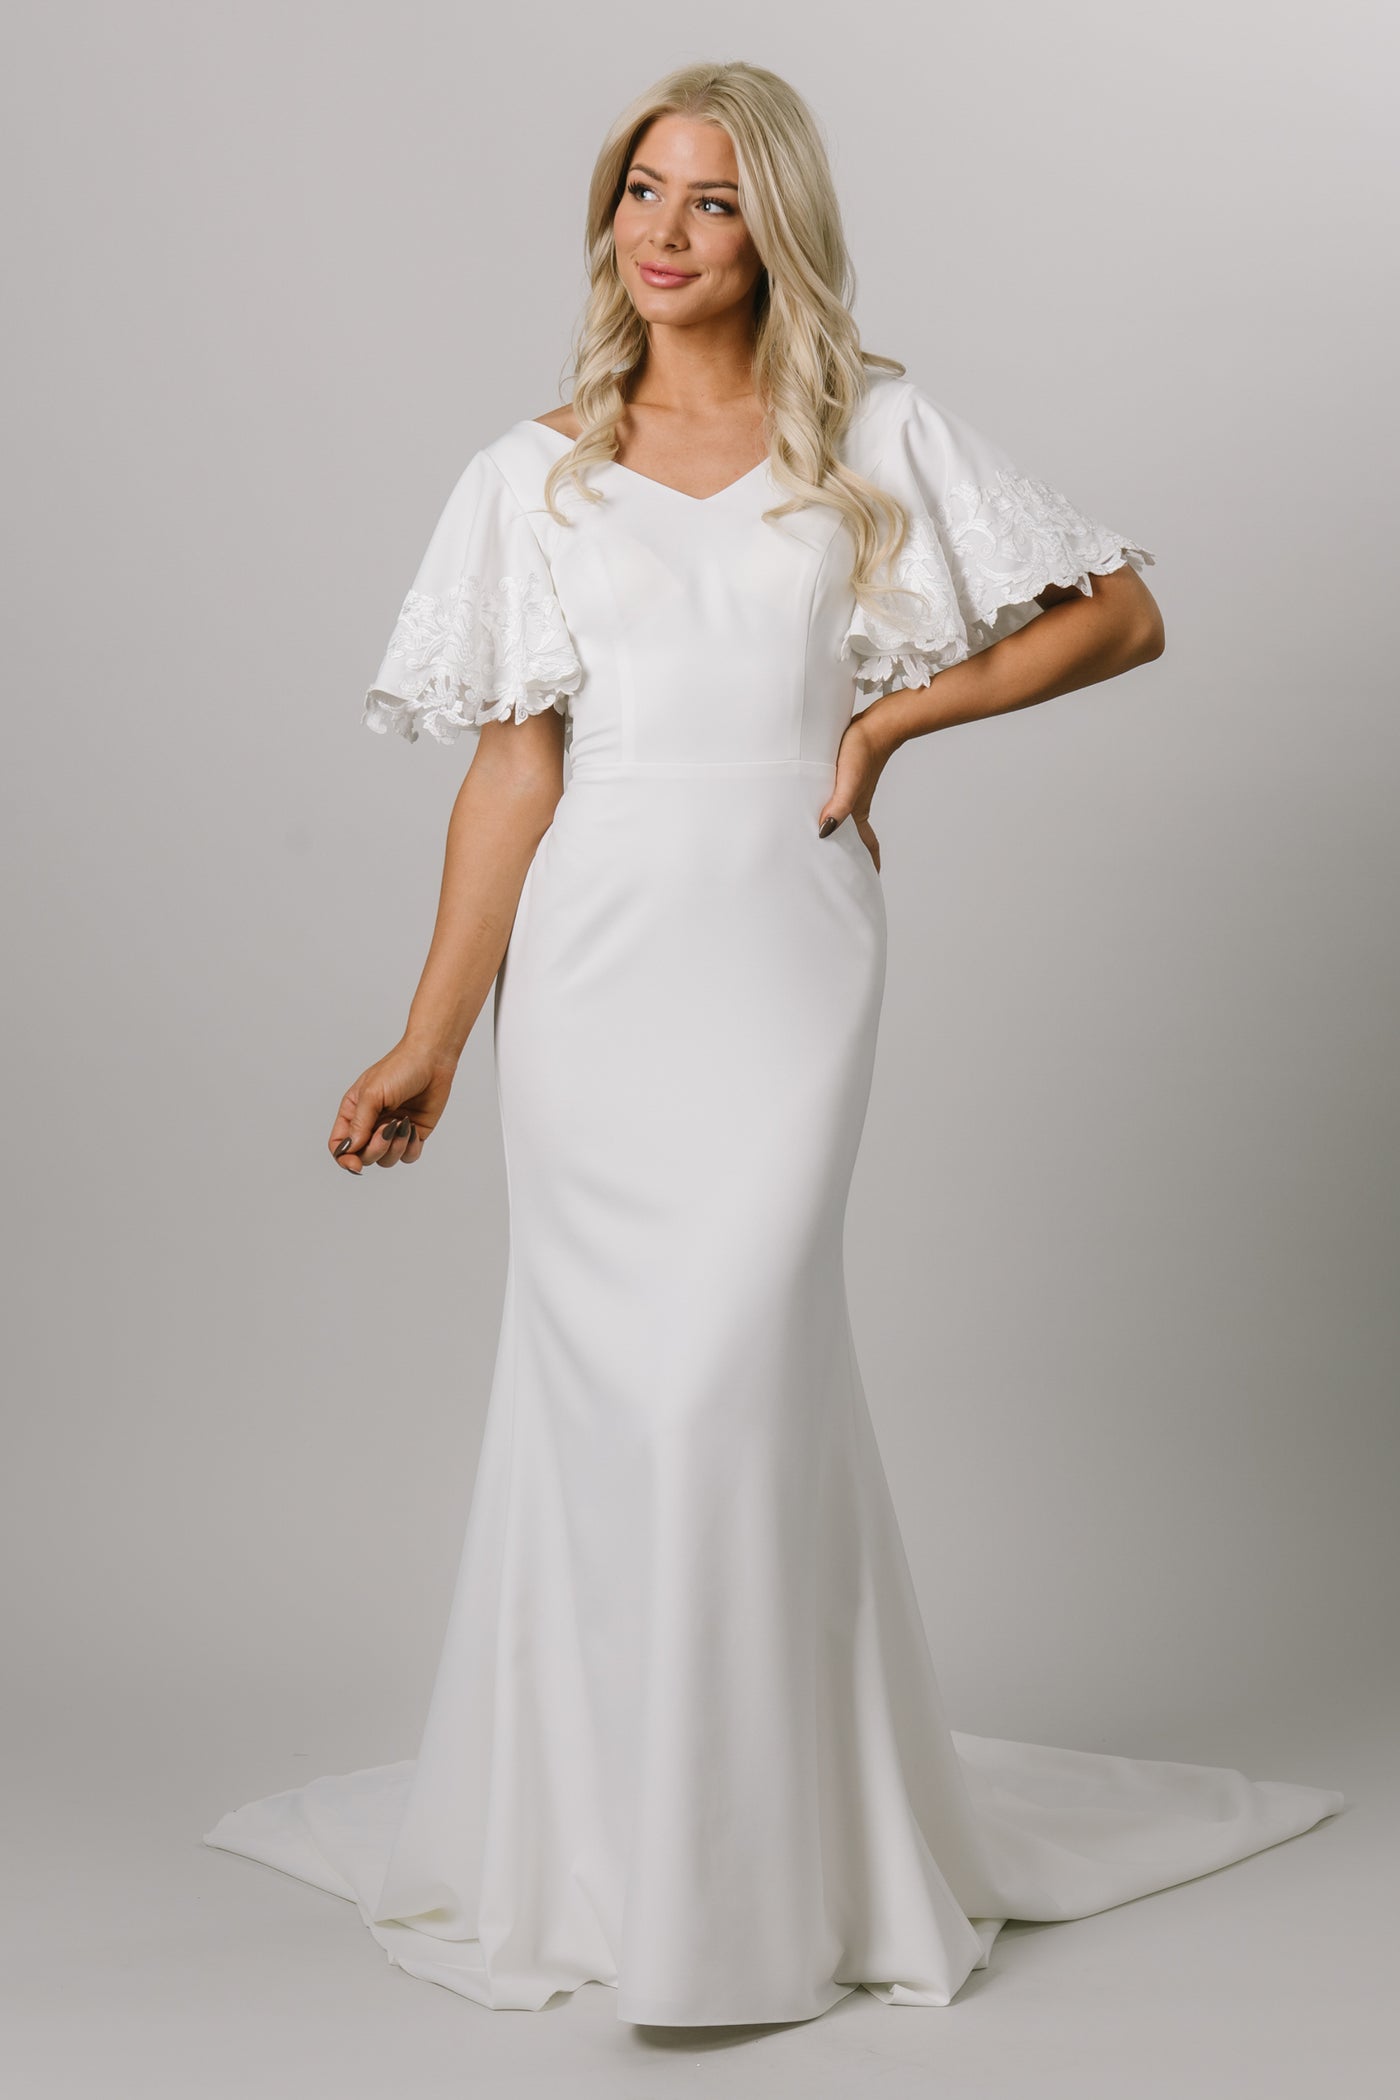 Sleek and modern flutter sleeve gown. The flutter sleeves have lace on the edge. This modest wedding dress is fitted and has a v-neckline. Moments Made Bridal loves this elegant modest wedding dress.